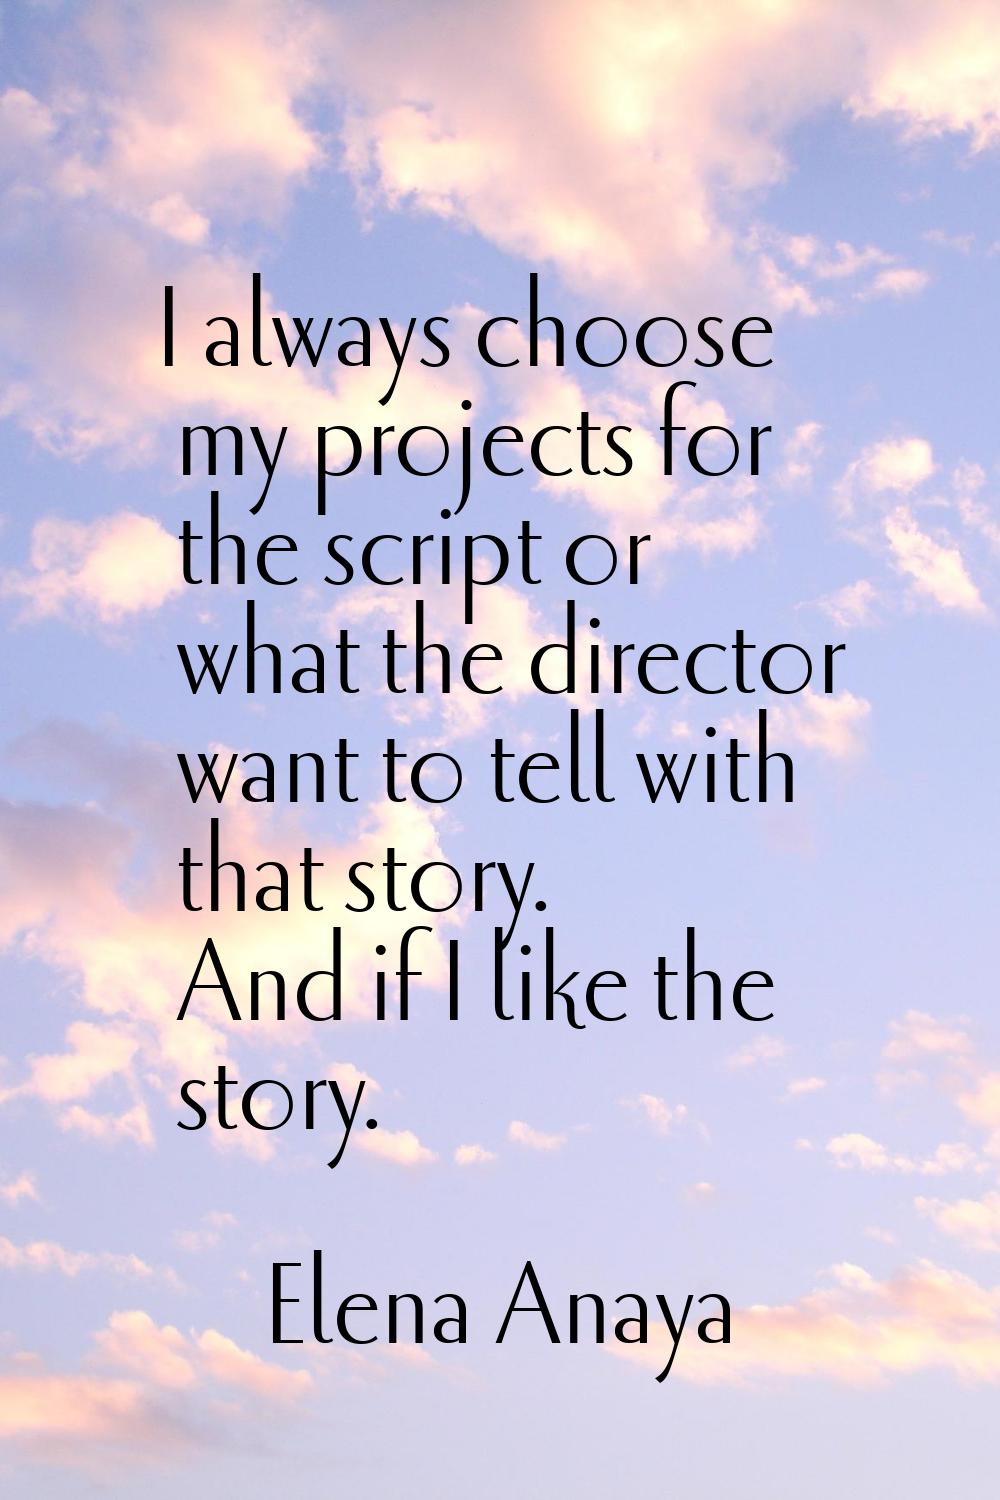 I always choose my projects for the script or what the director want to tell with that story. And i